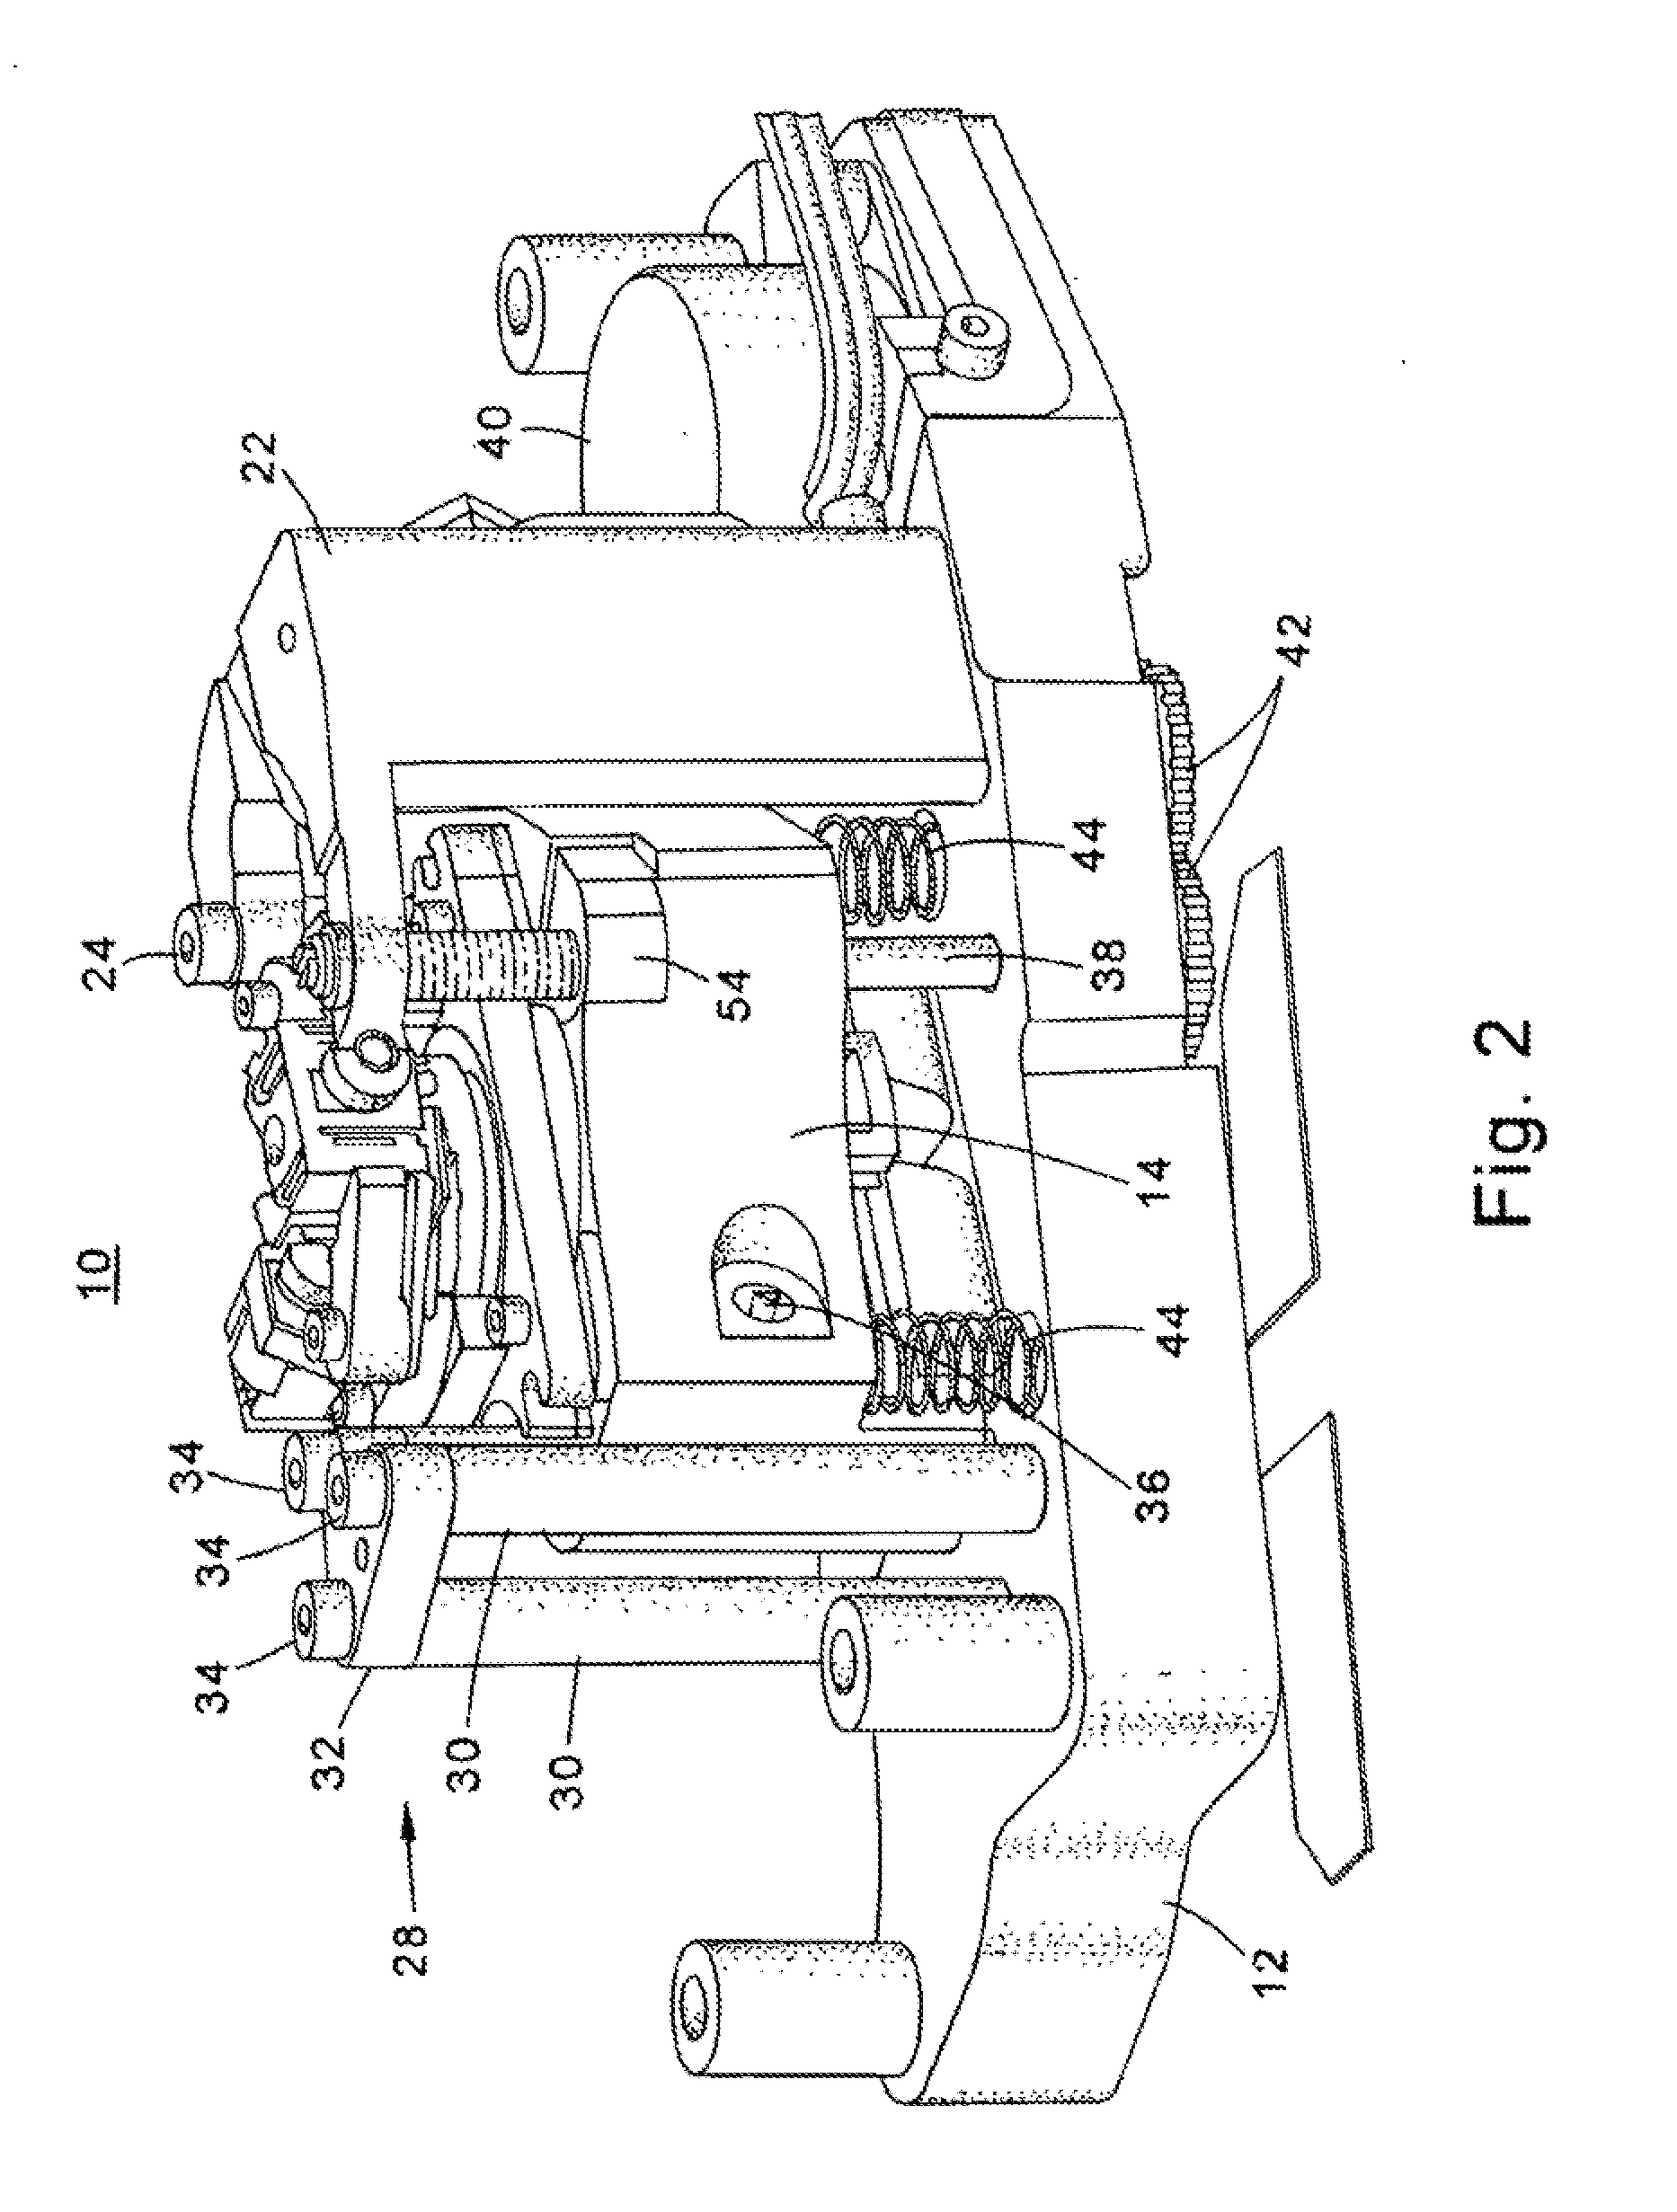 Head Actuator Assembly for a Tape Drive